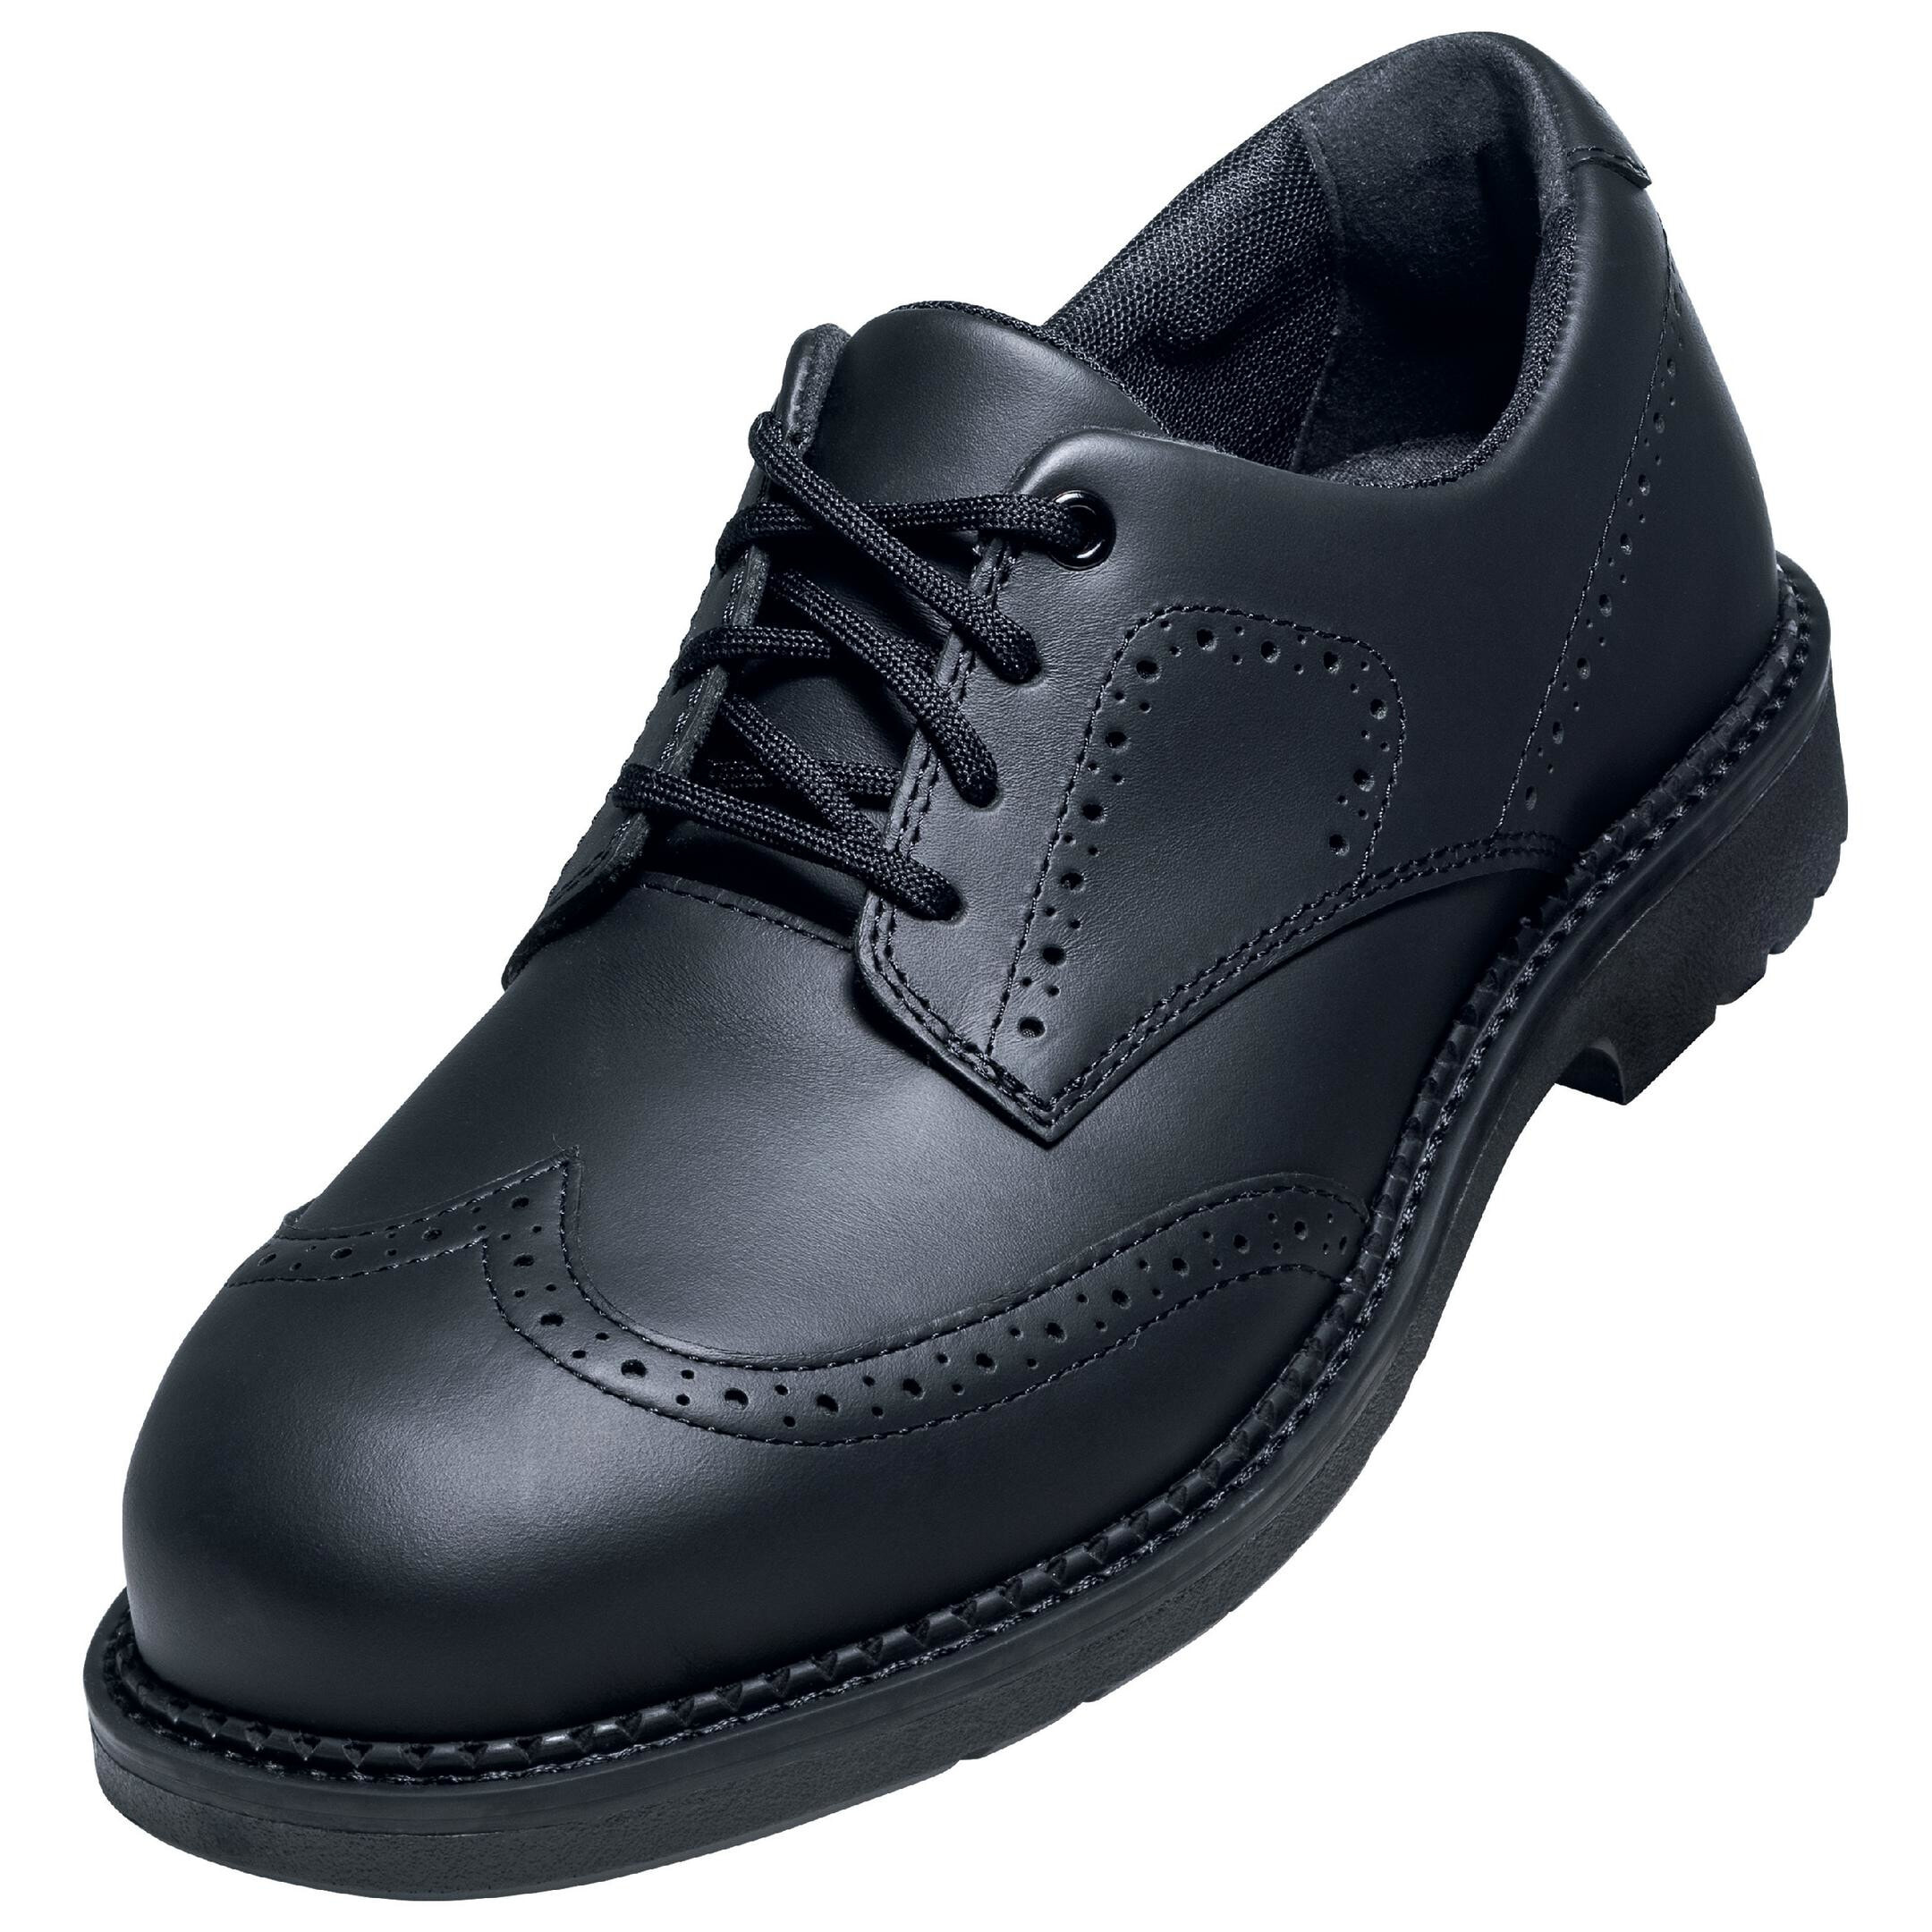 UVEX Arbeitsschutz 84483 - Male - Adult - Safety shoes - Black - ESD - S3 - SRC - Lace-up closure